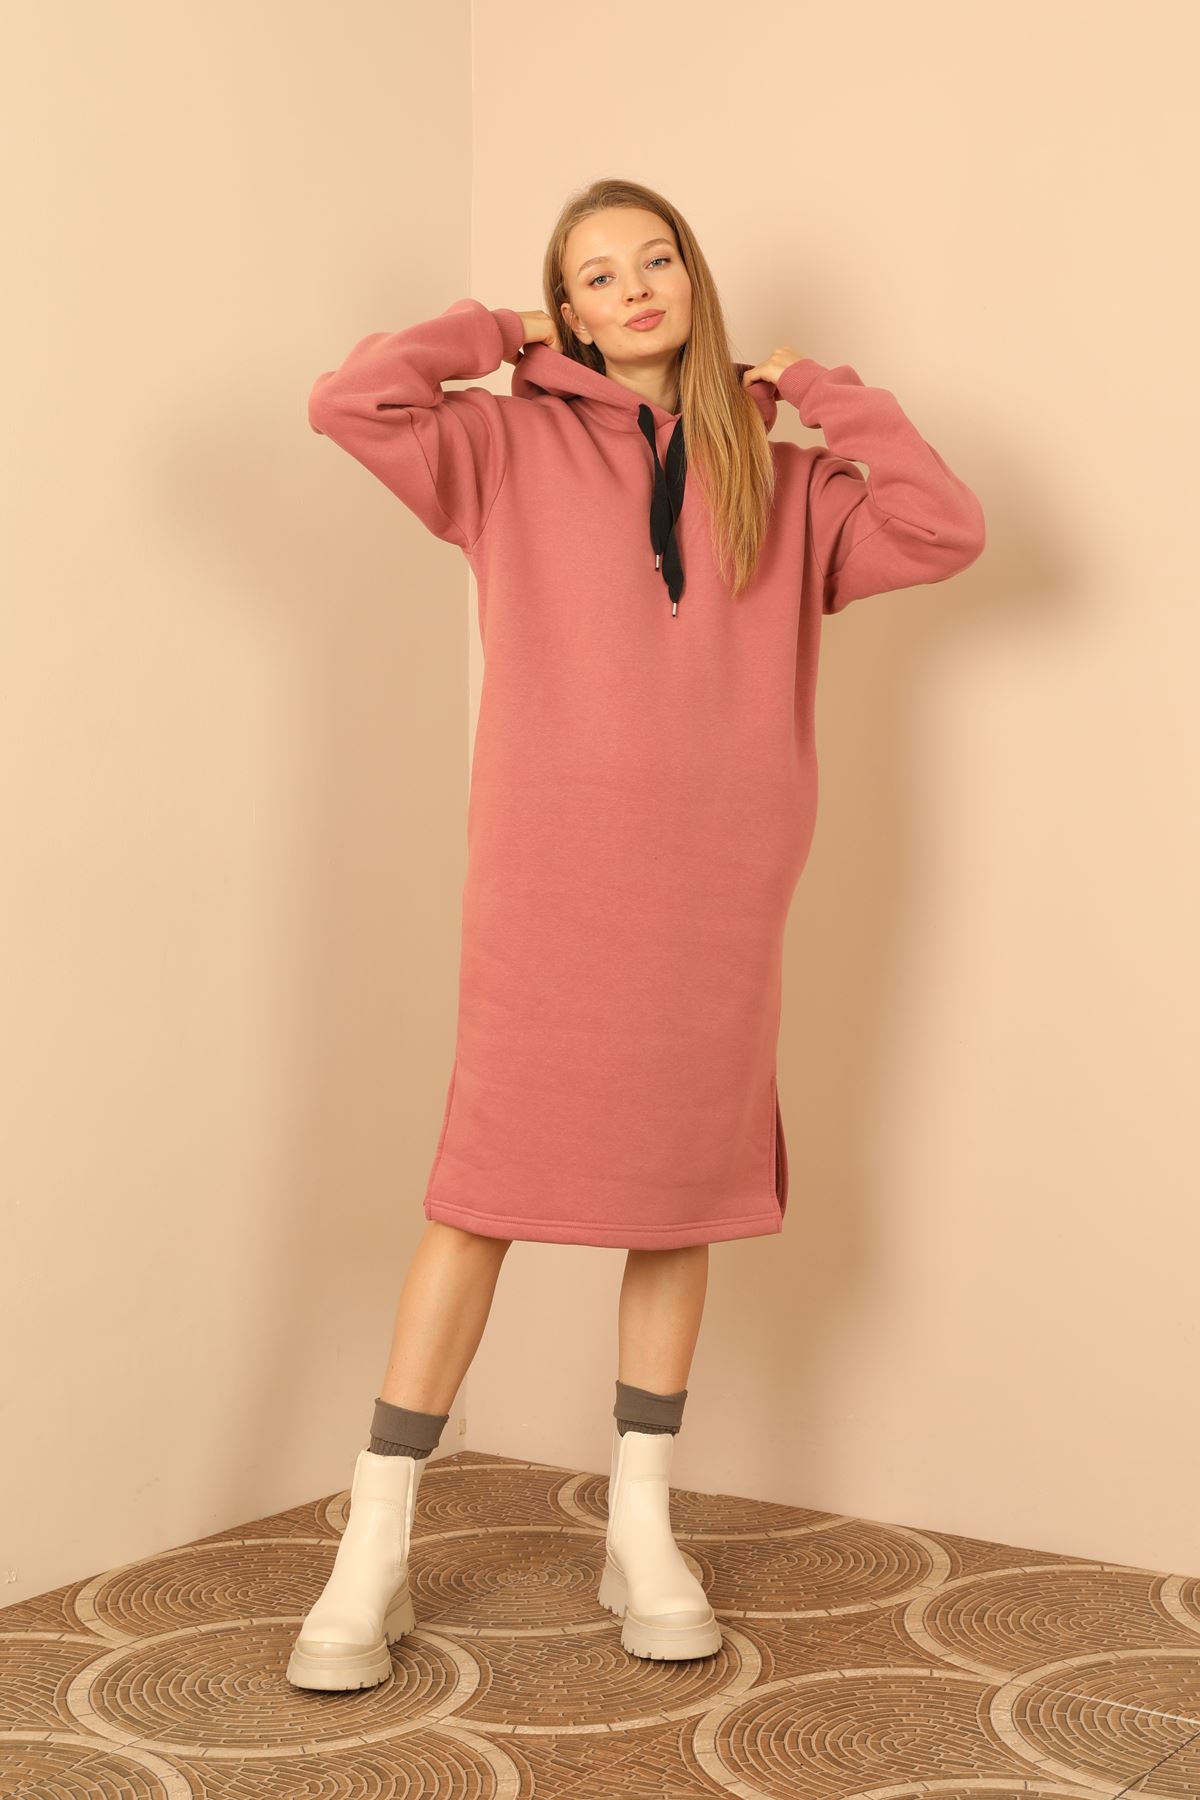 Third Knit With Wool İnside Fabric Long Sleeve Hooded Oversize Women Dress - Rose 